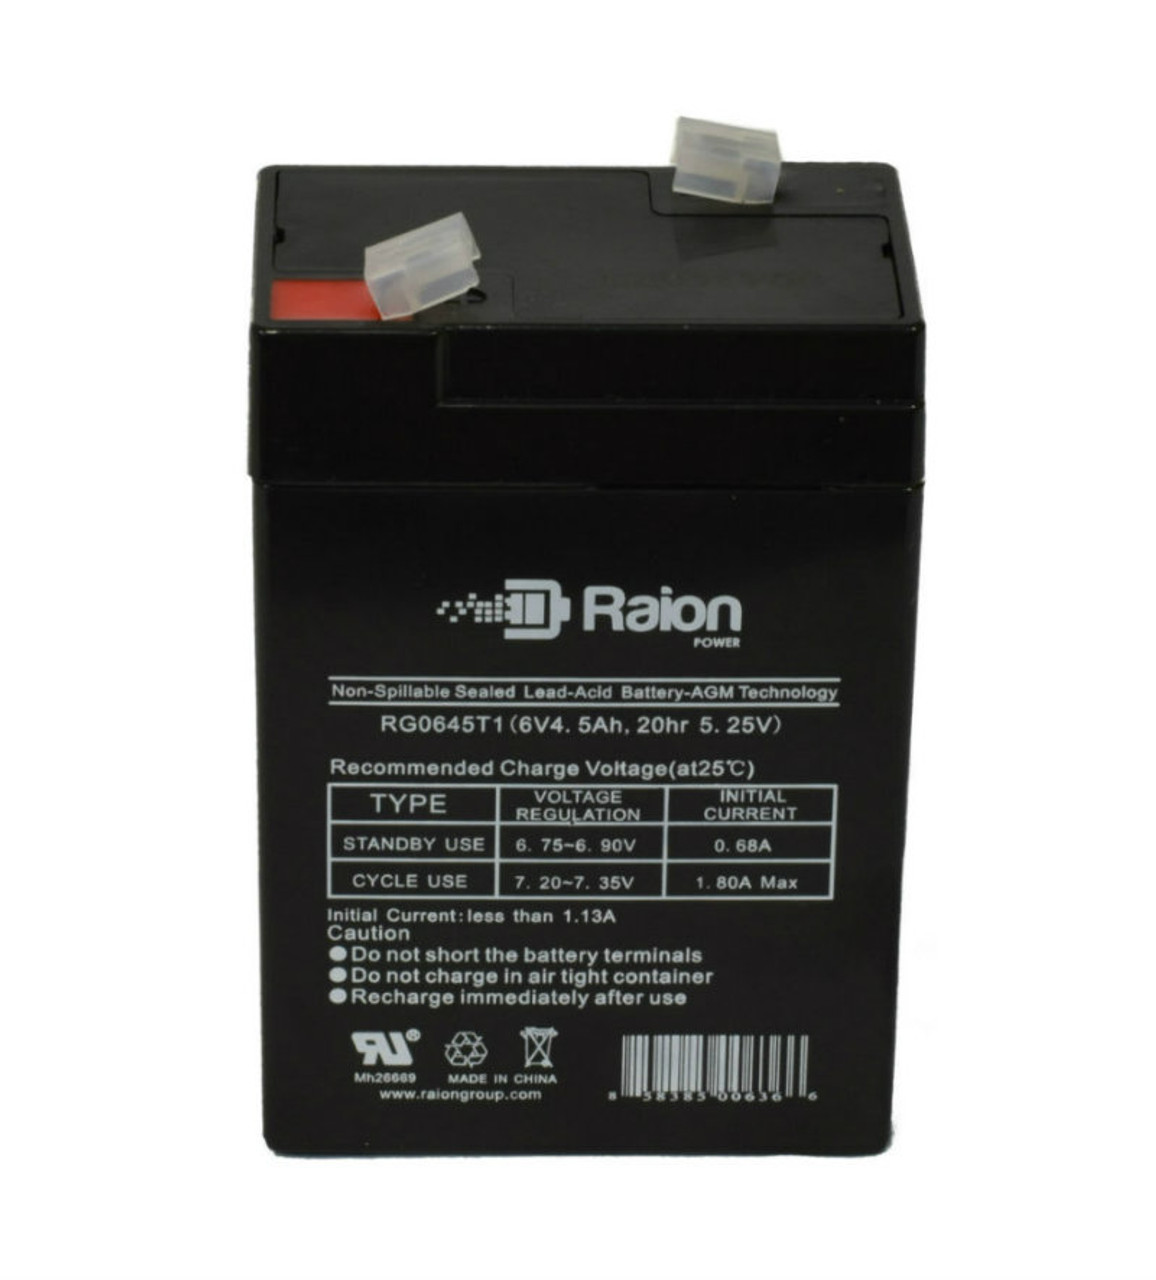 Raion Power RG0645T1 Replacement Battery Cartridge for SBB 3FM4.5